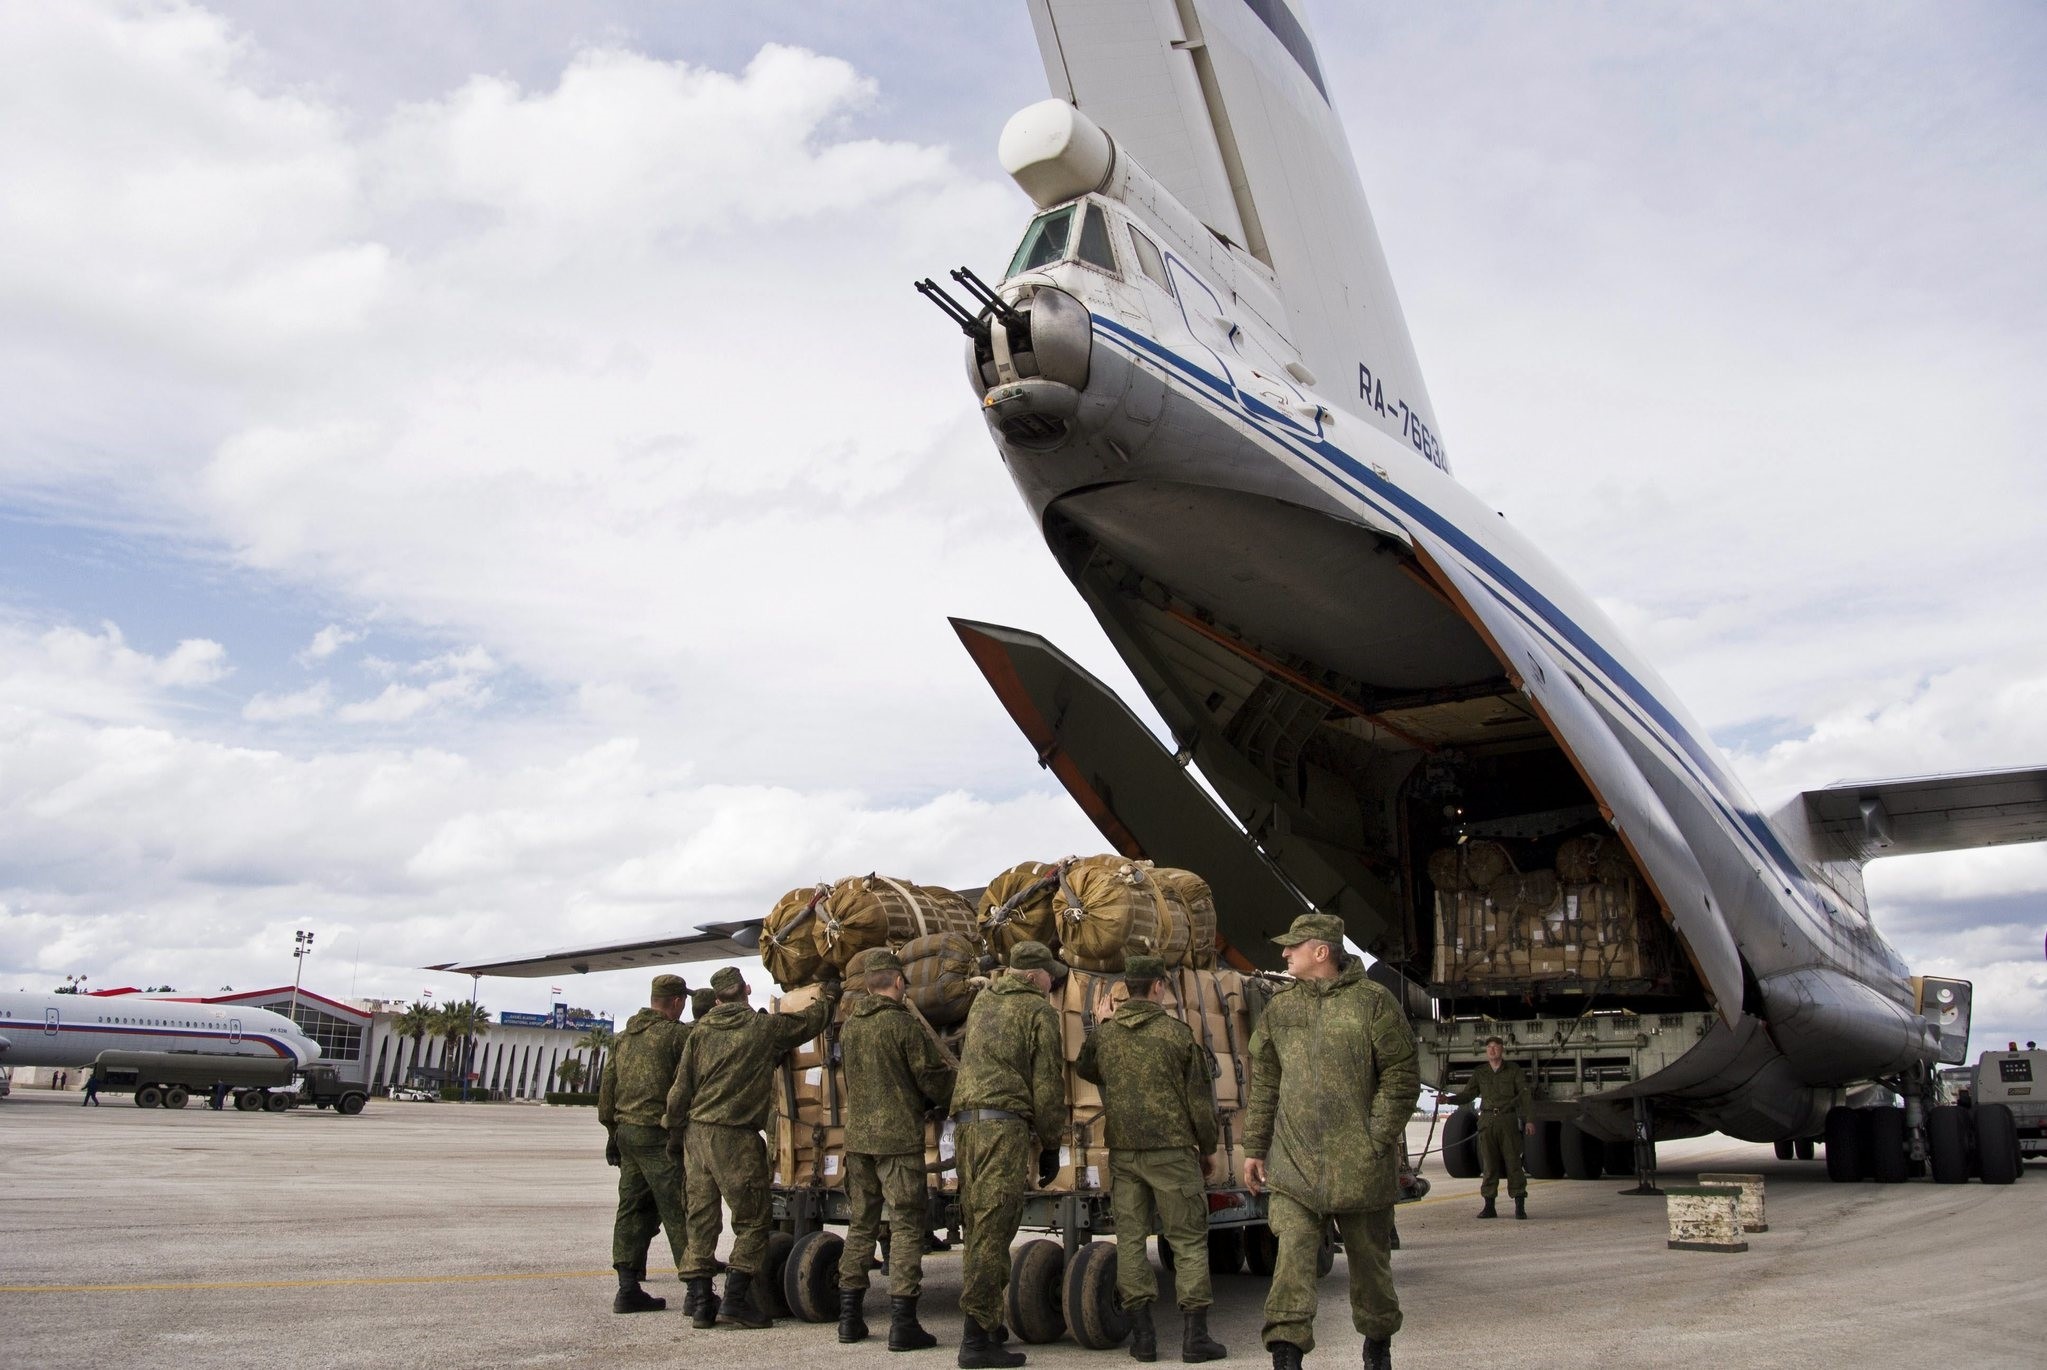 Russian air force personnel prepare to load humanitarian cargo on board a Syrian Il-76 plane at Hemeimeem air base in Syria. (AP Photo)